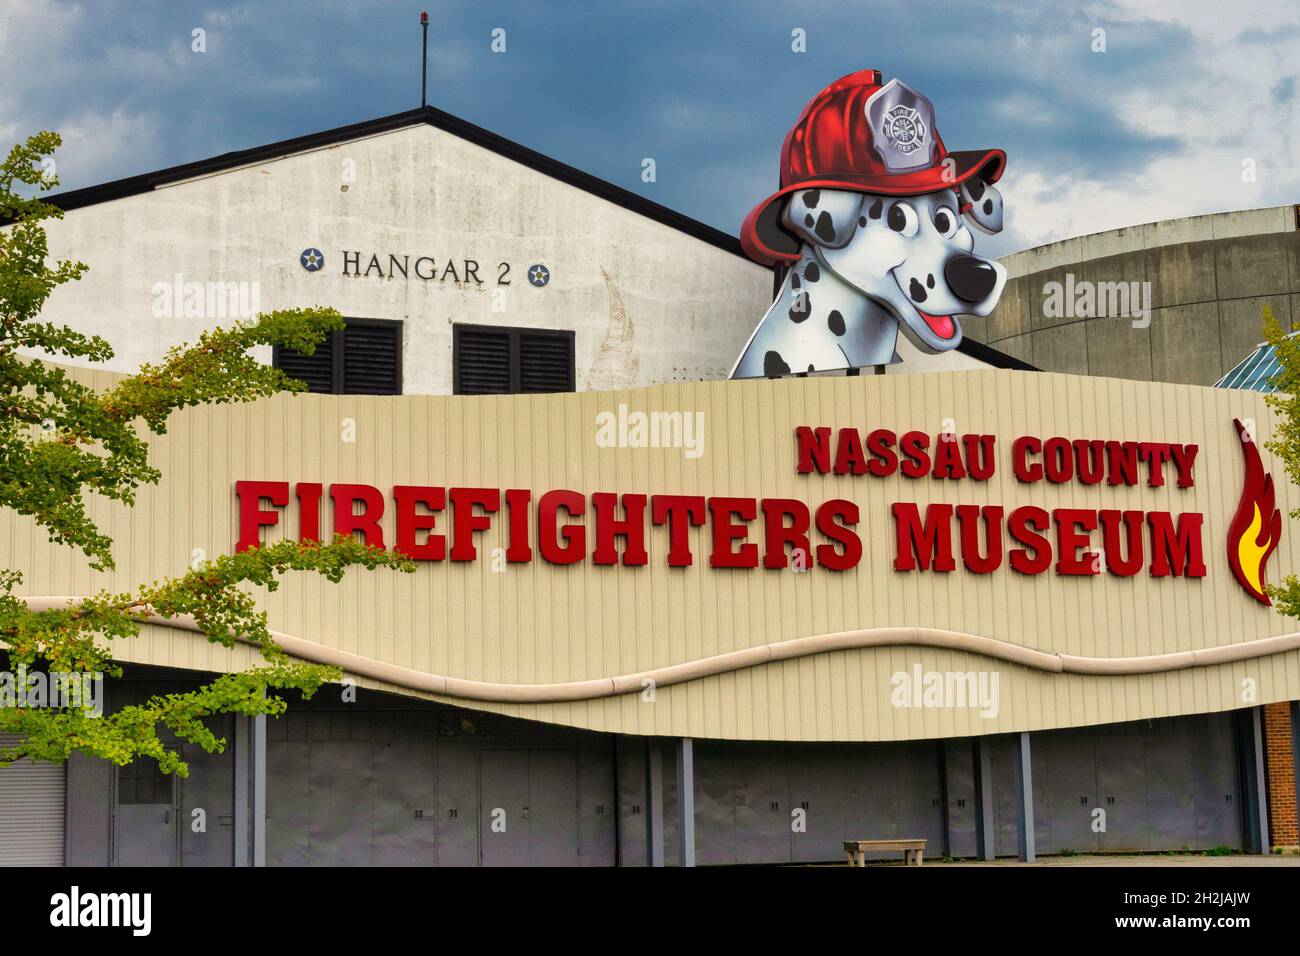 The Nassau County Firefighters Museum is located on Long Island, New York, USA Stock Photo